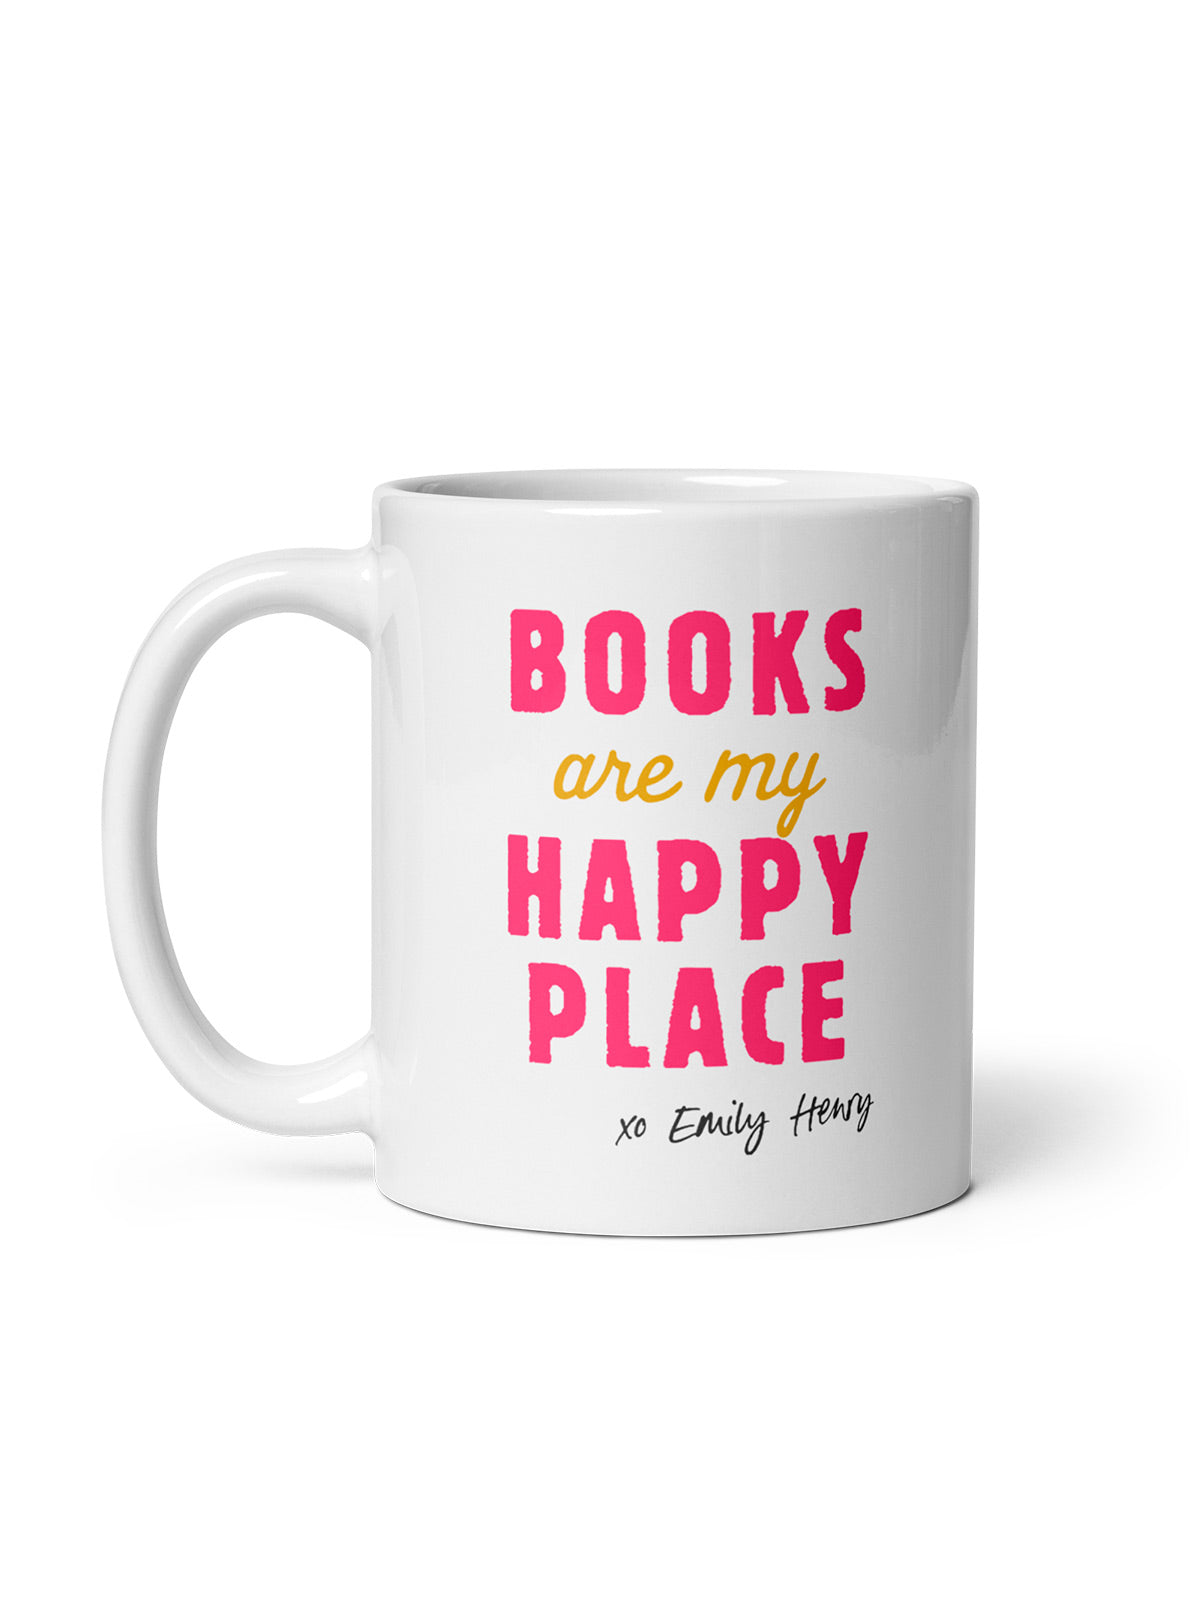 Emily Henry - Books Are My Happy Place tote bag